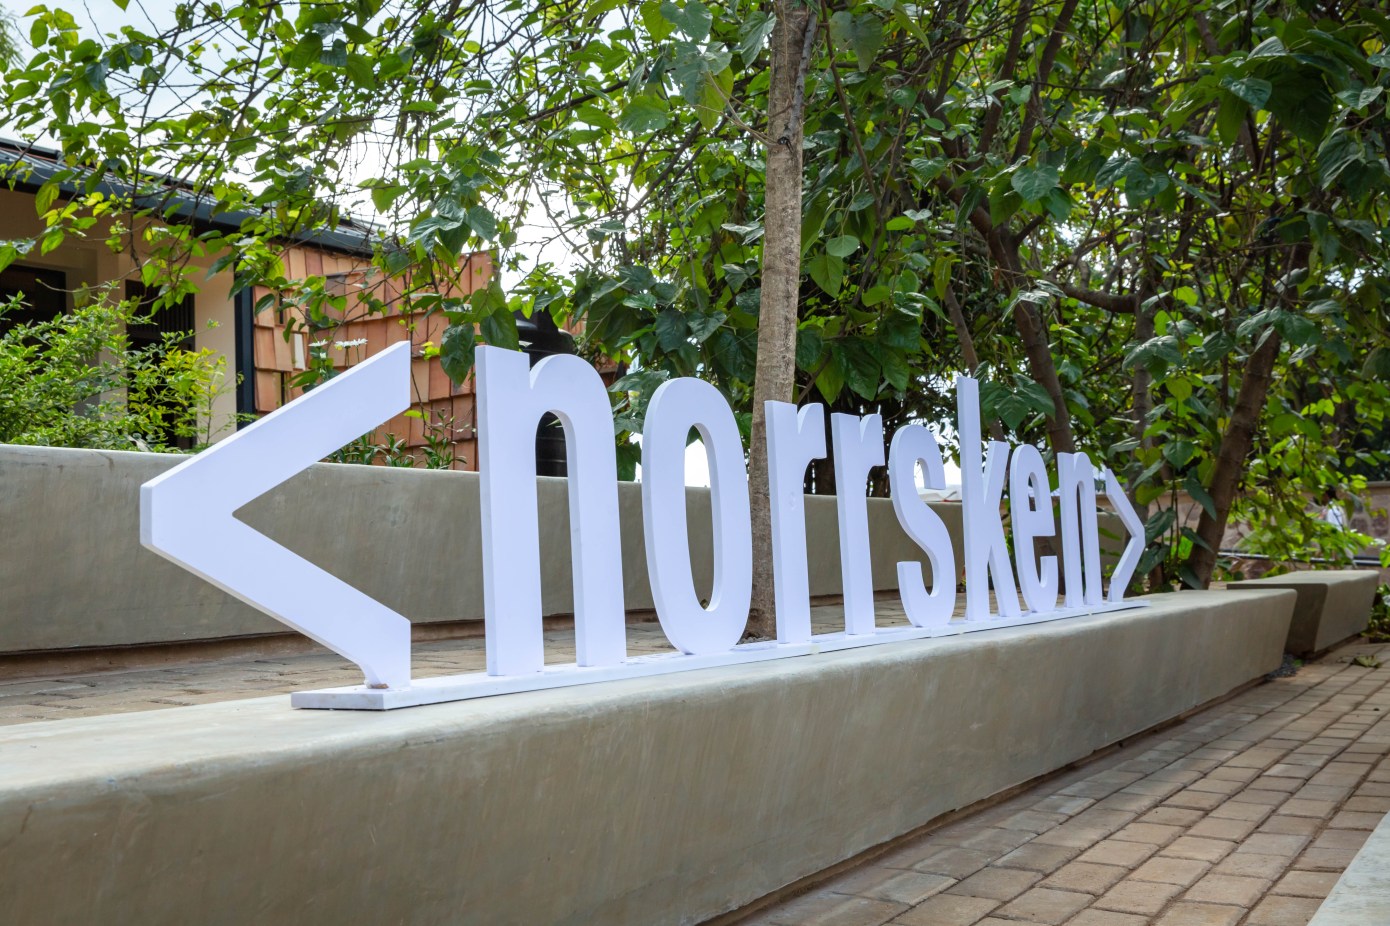 Norrsken Foundation’s hub opens in Rwanda, to house 1,000 entrepreneurs by next year